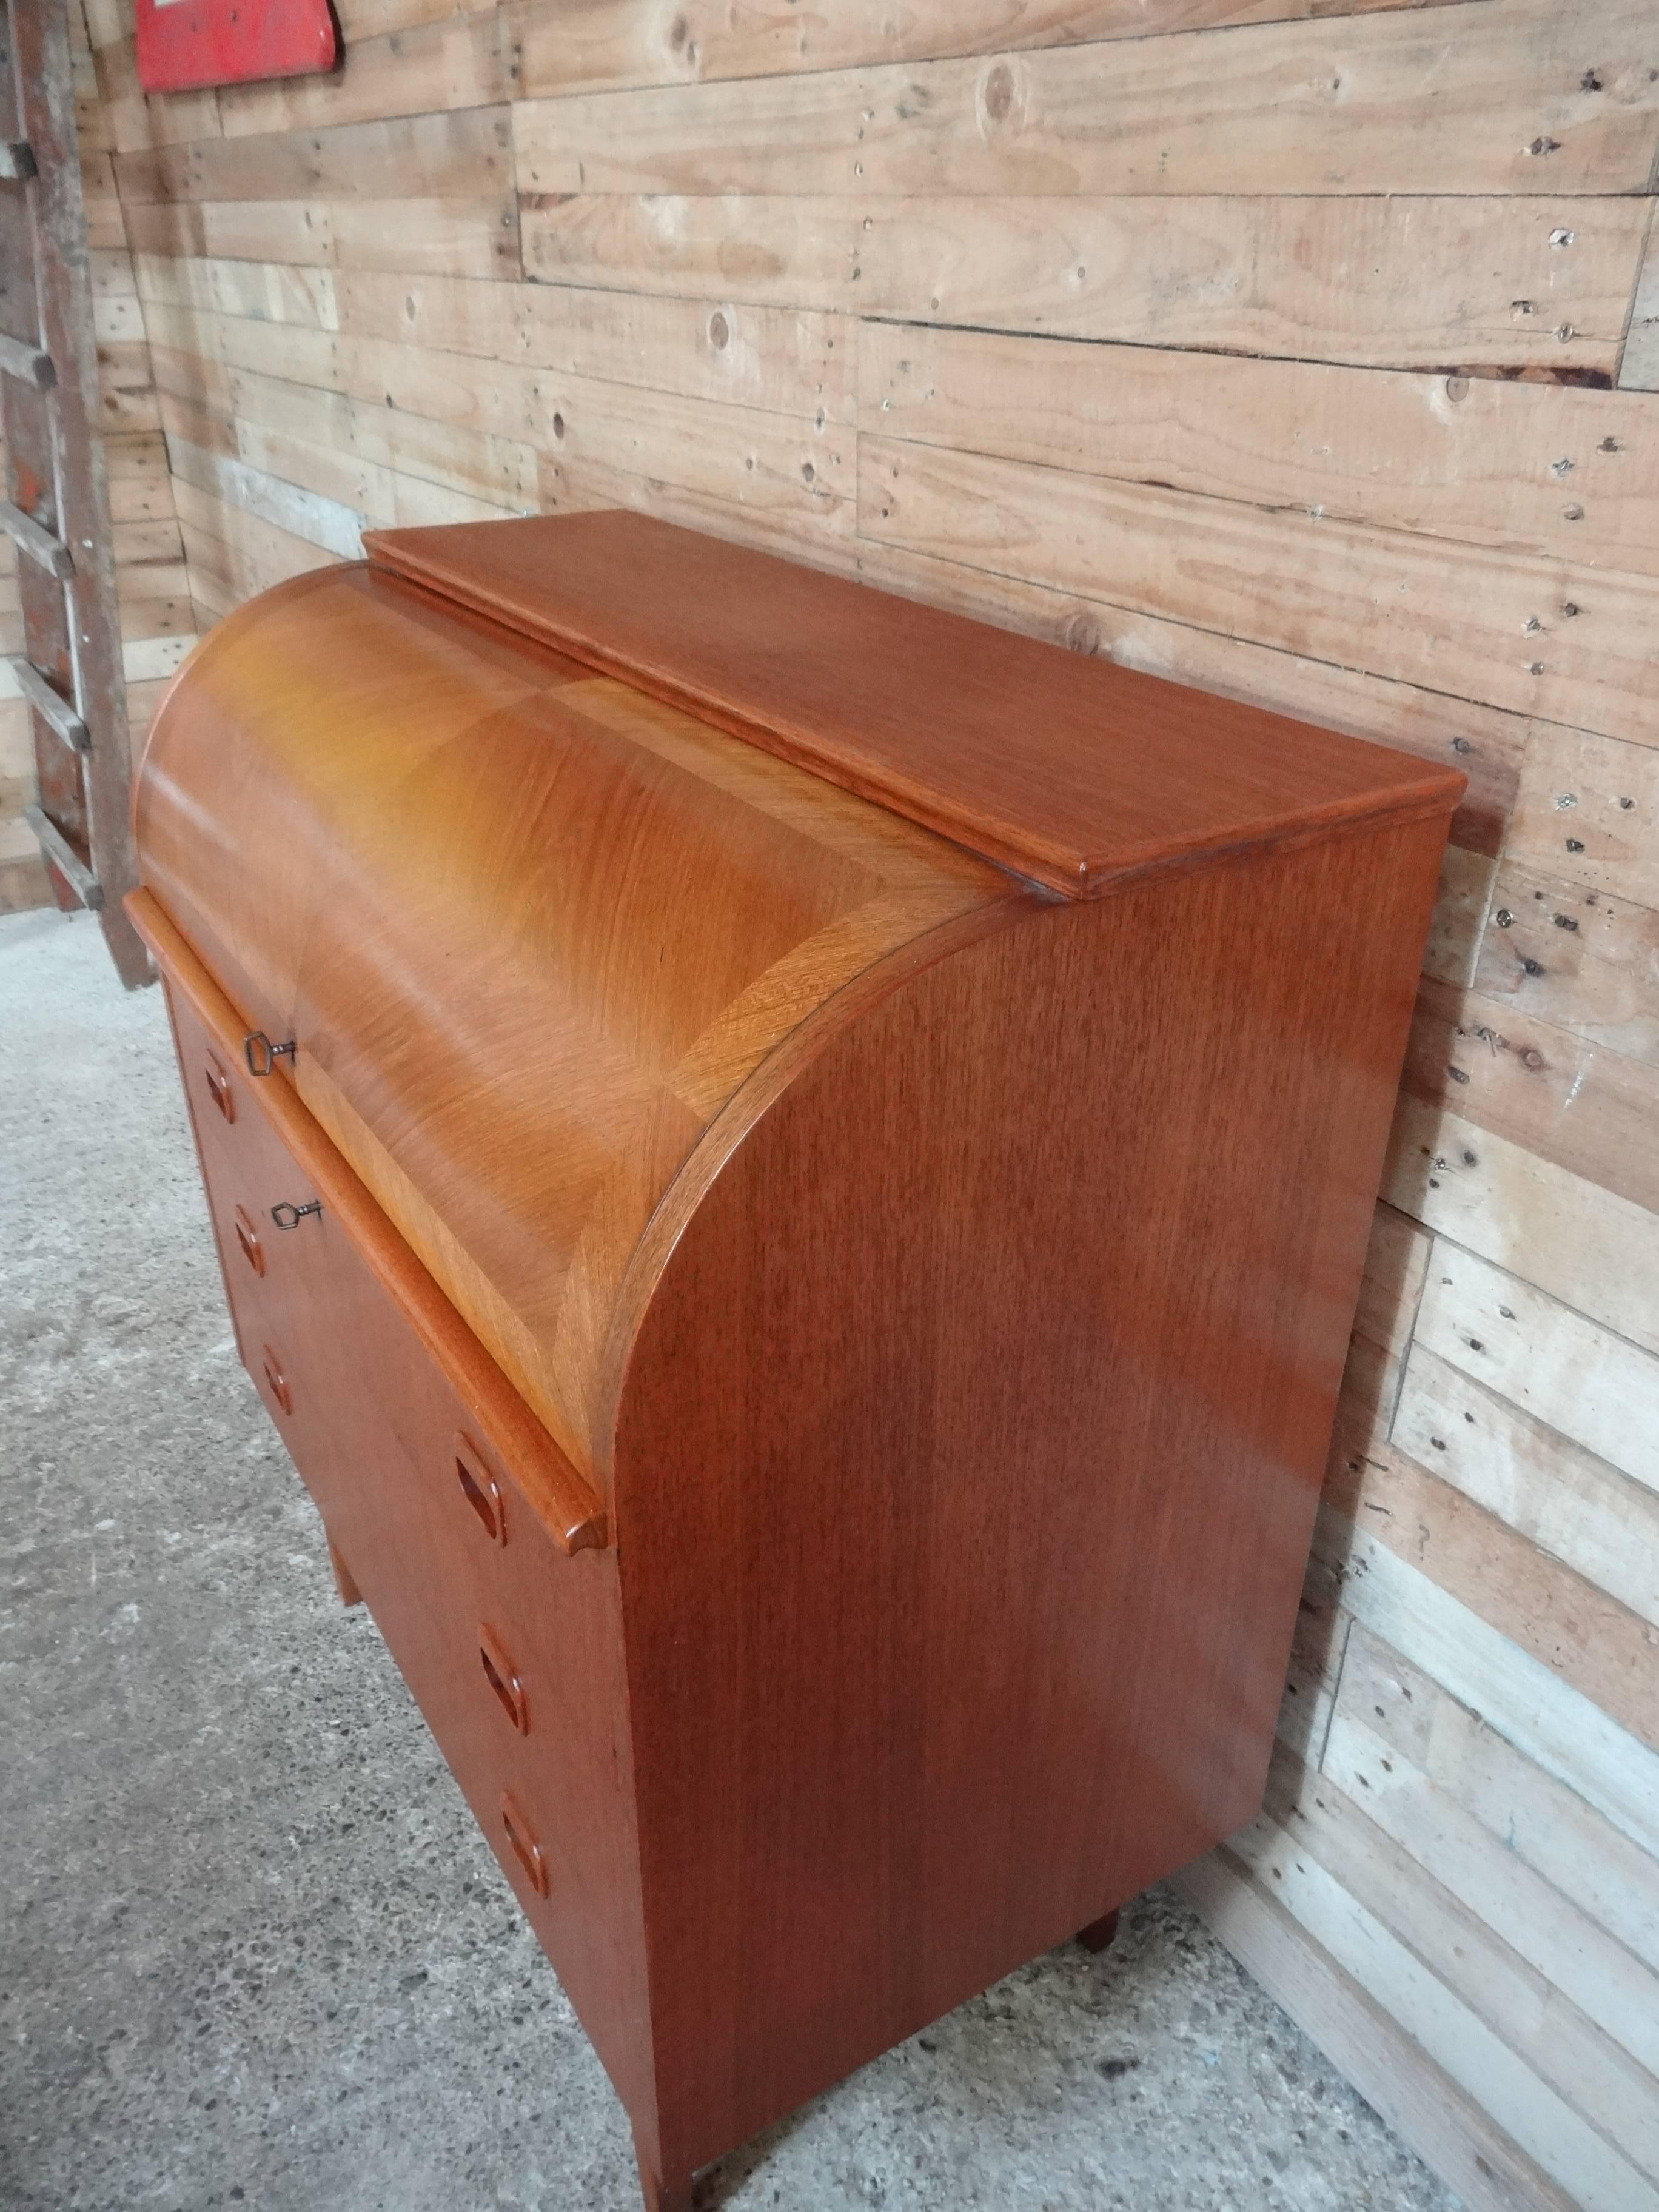 Danish round top desk, lovely design. It stands on solid teak legs and comes with a pull out desk shelf, three drawers, will look great in any situation. 

Measures: H 90cm, D 47cm, W 90cm.